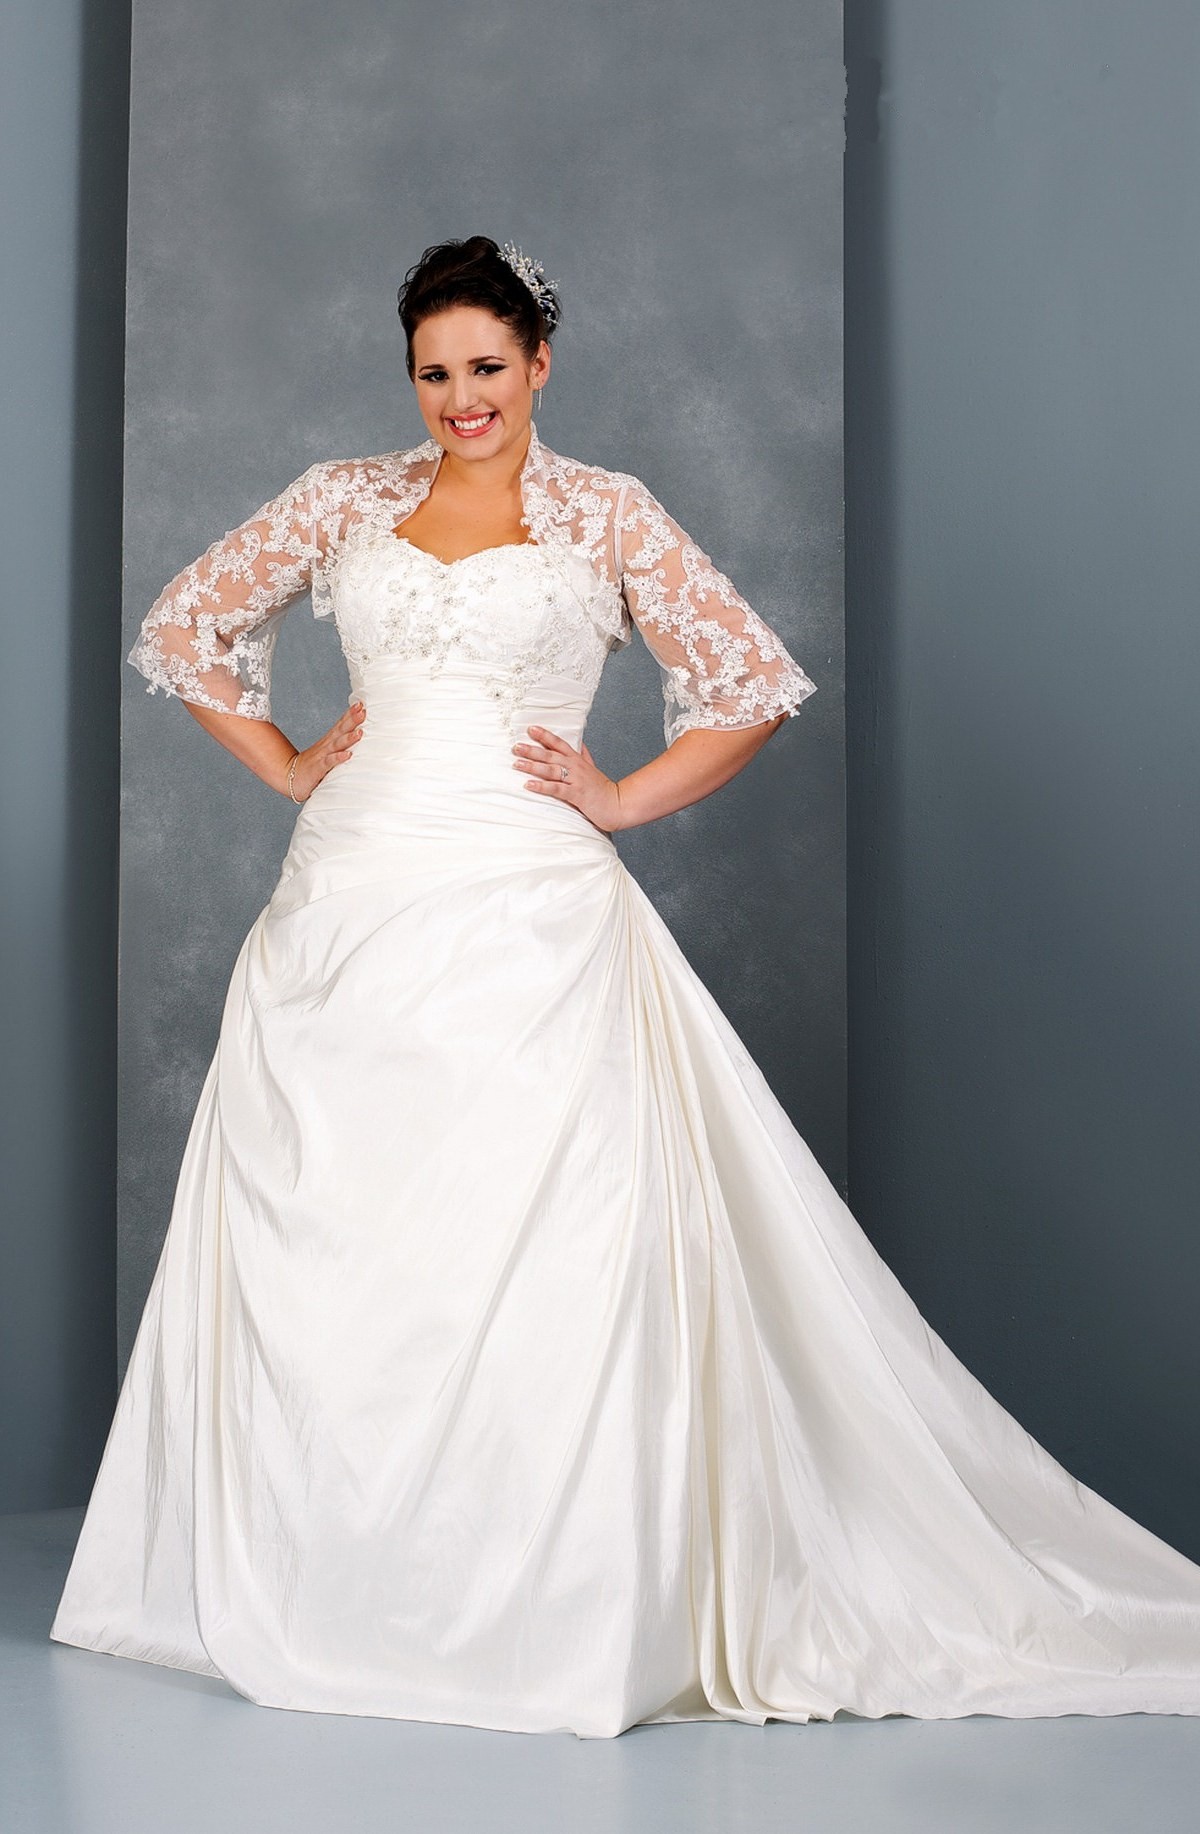 15 Plus Size Wedding Dresses To Make You Look Like Queen